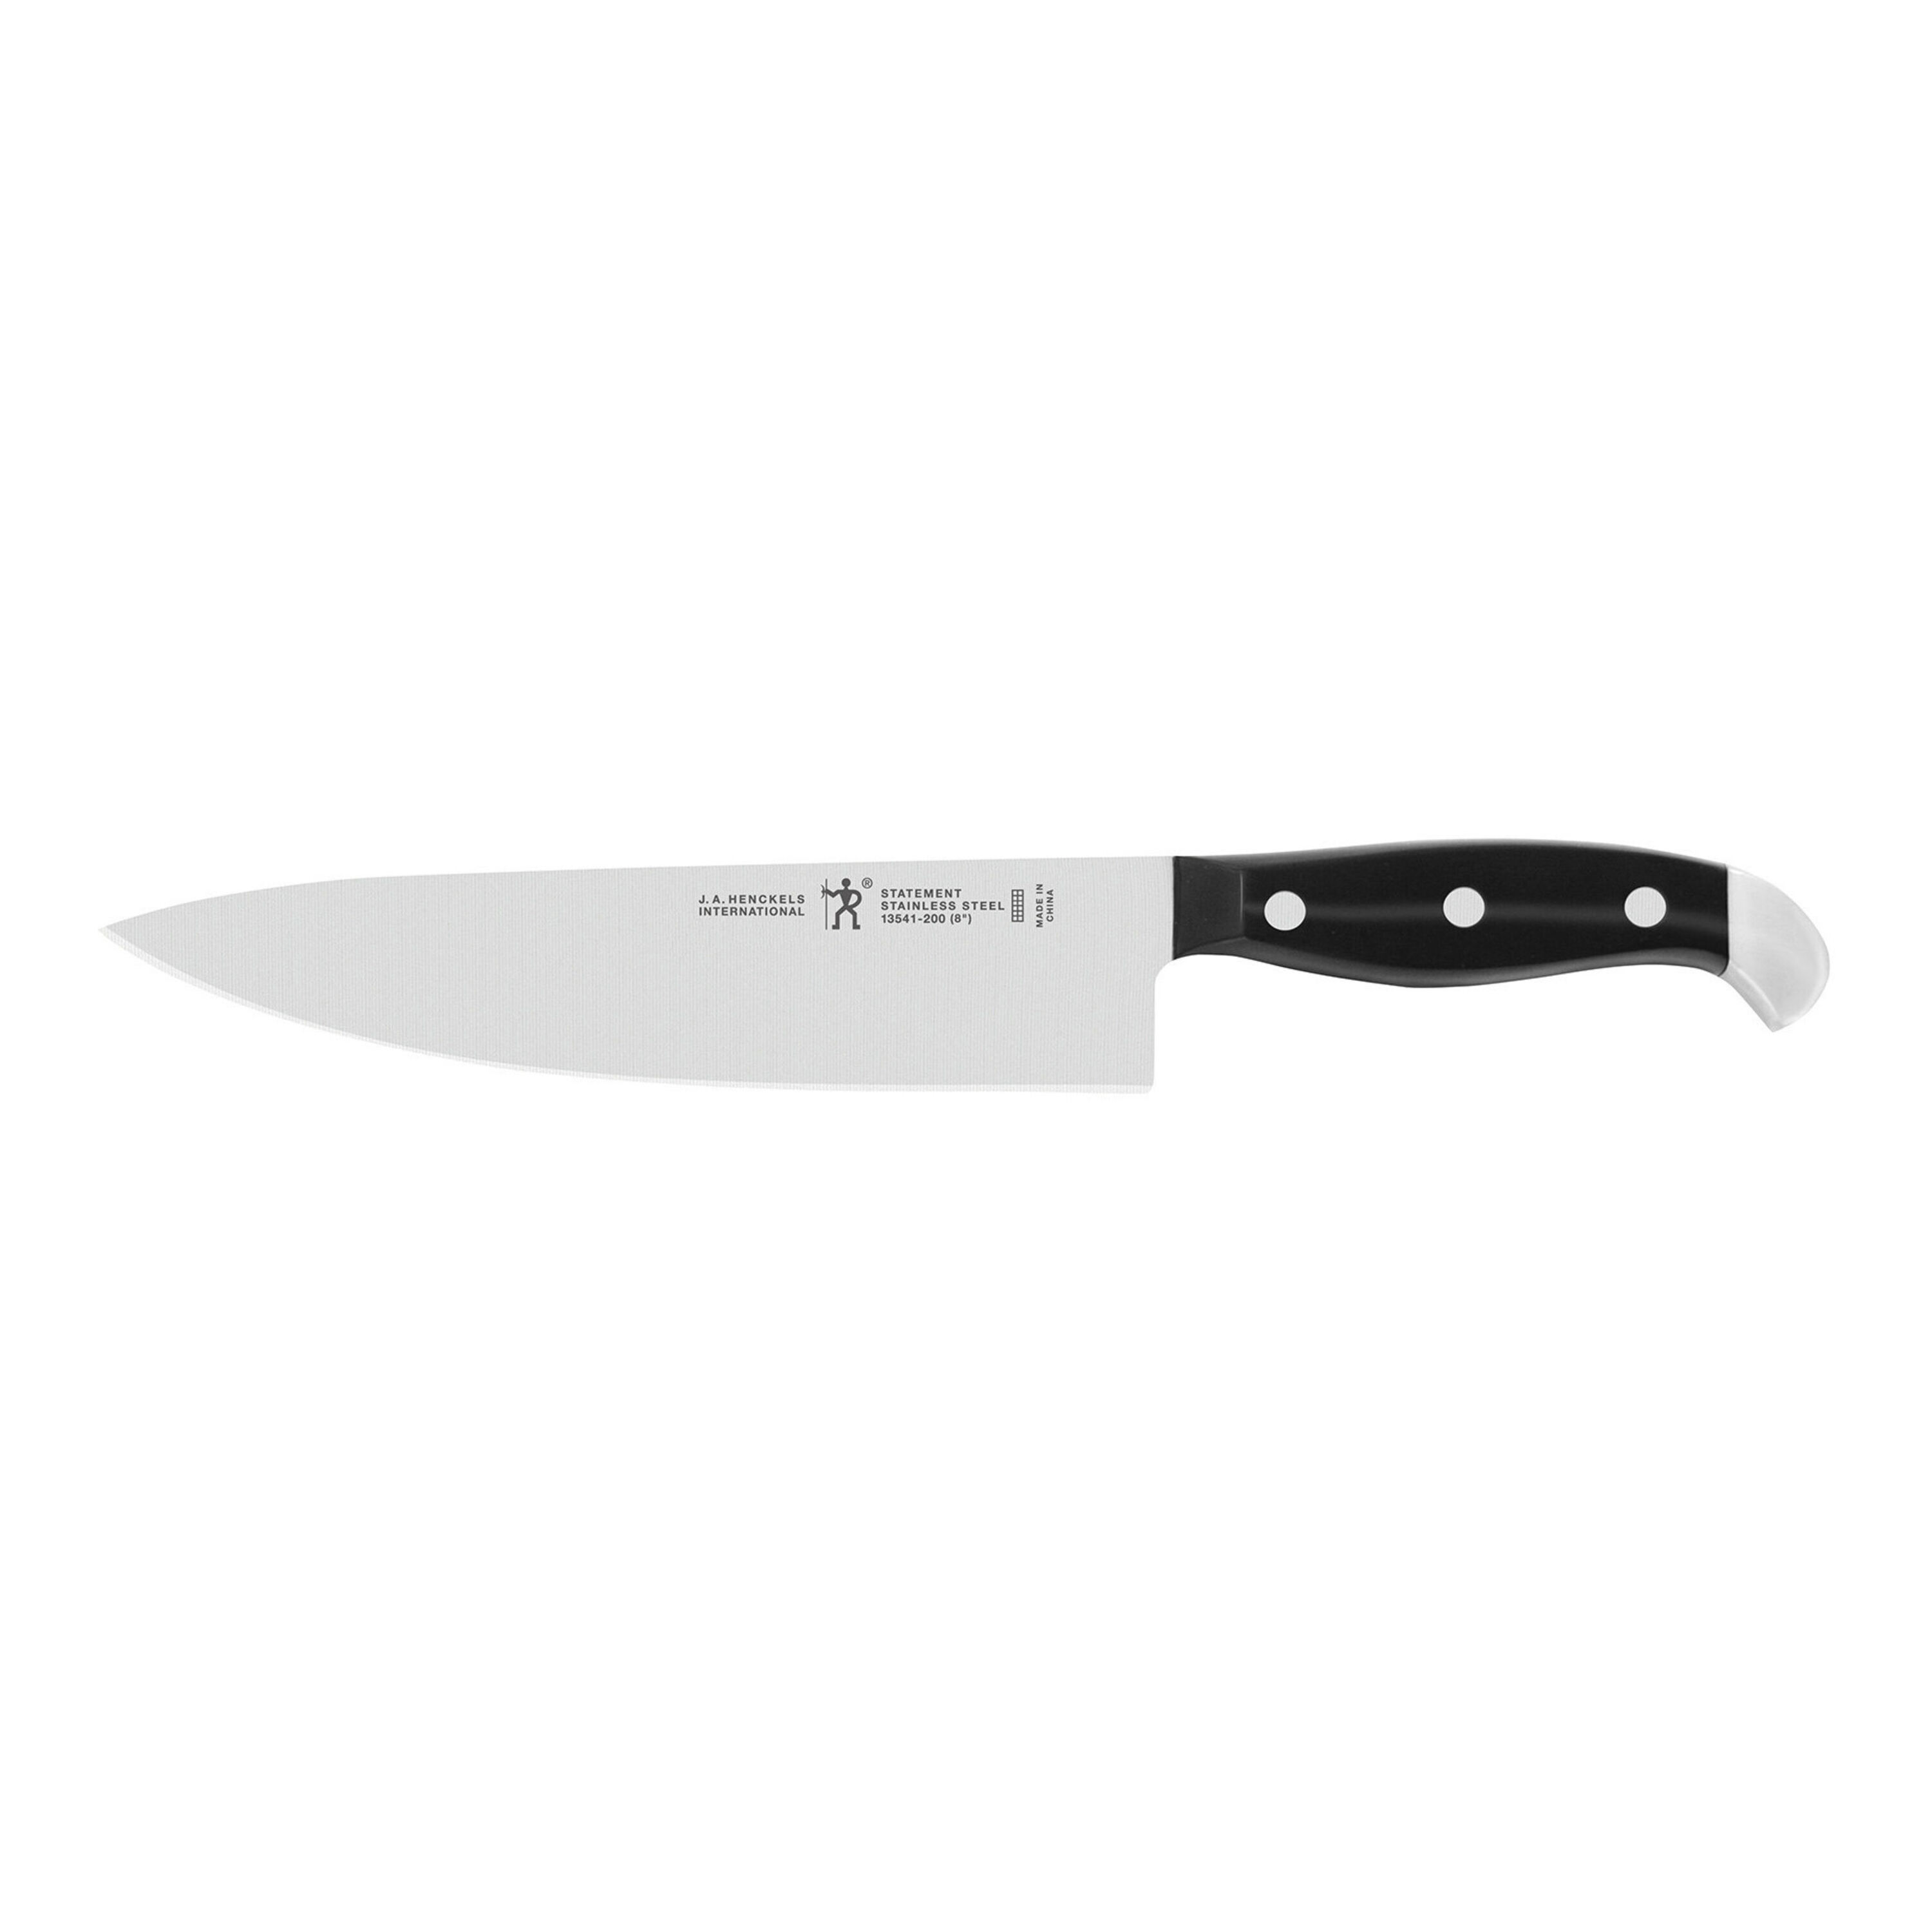 Chef Knife 8 inch Professional Kitchen Knives with Cover Stainless